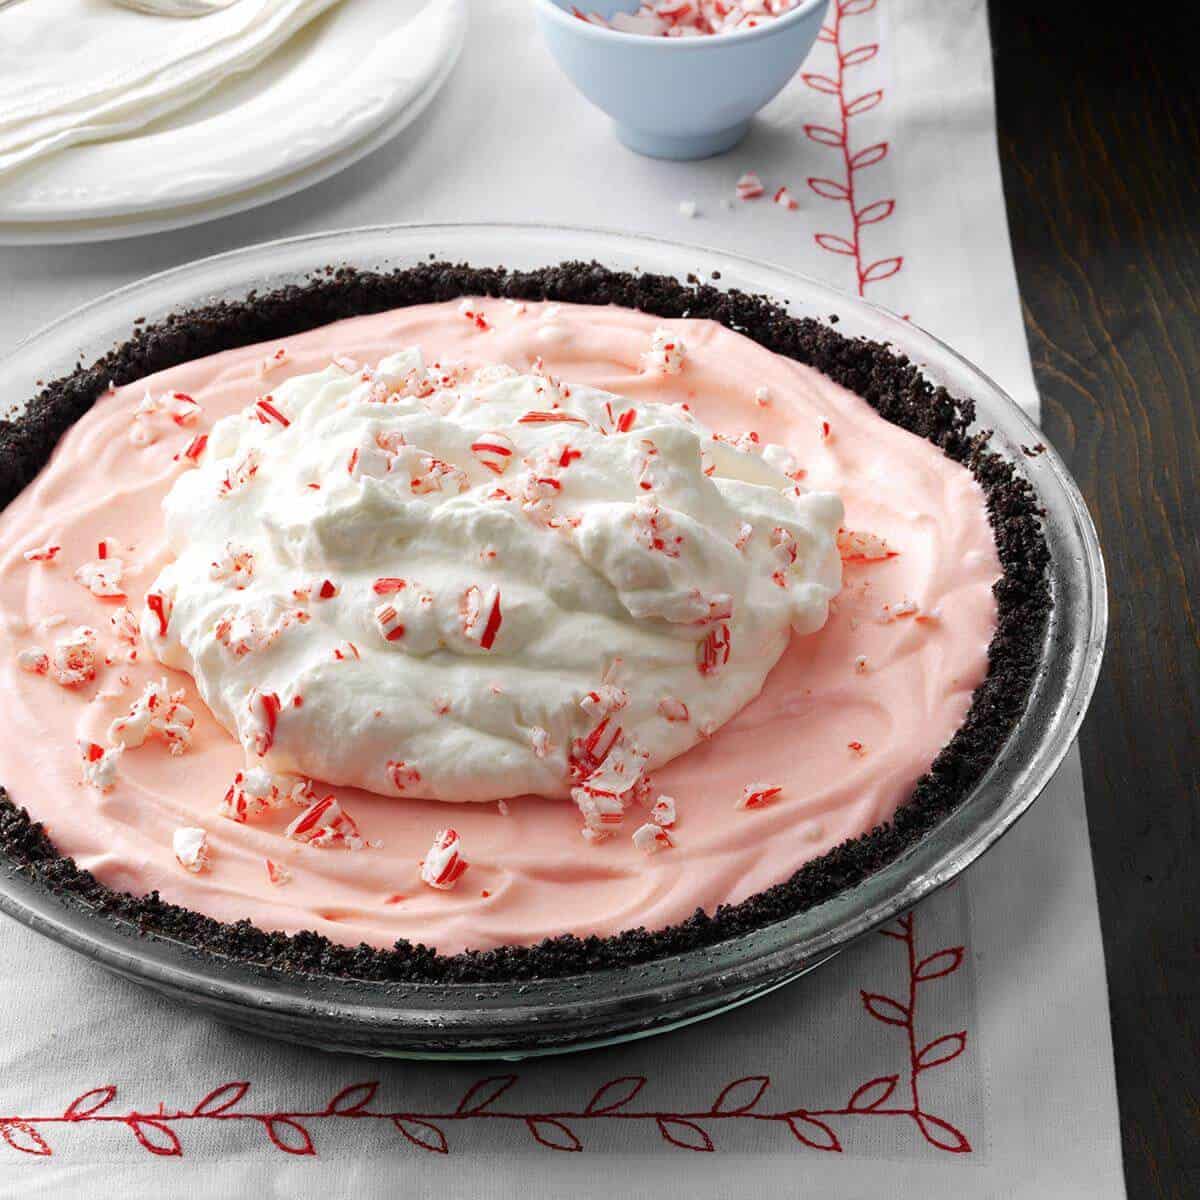 Candy Cane pie 15 Delicious Christmas Pie Recipes to Bake